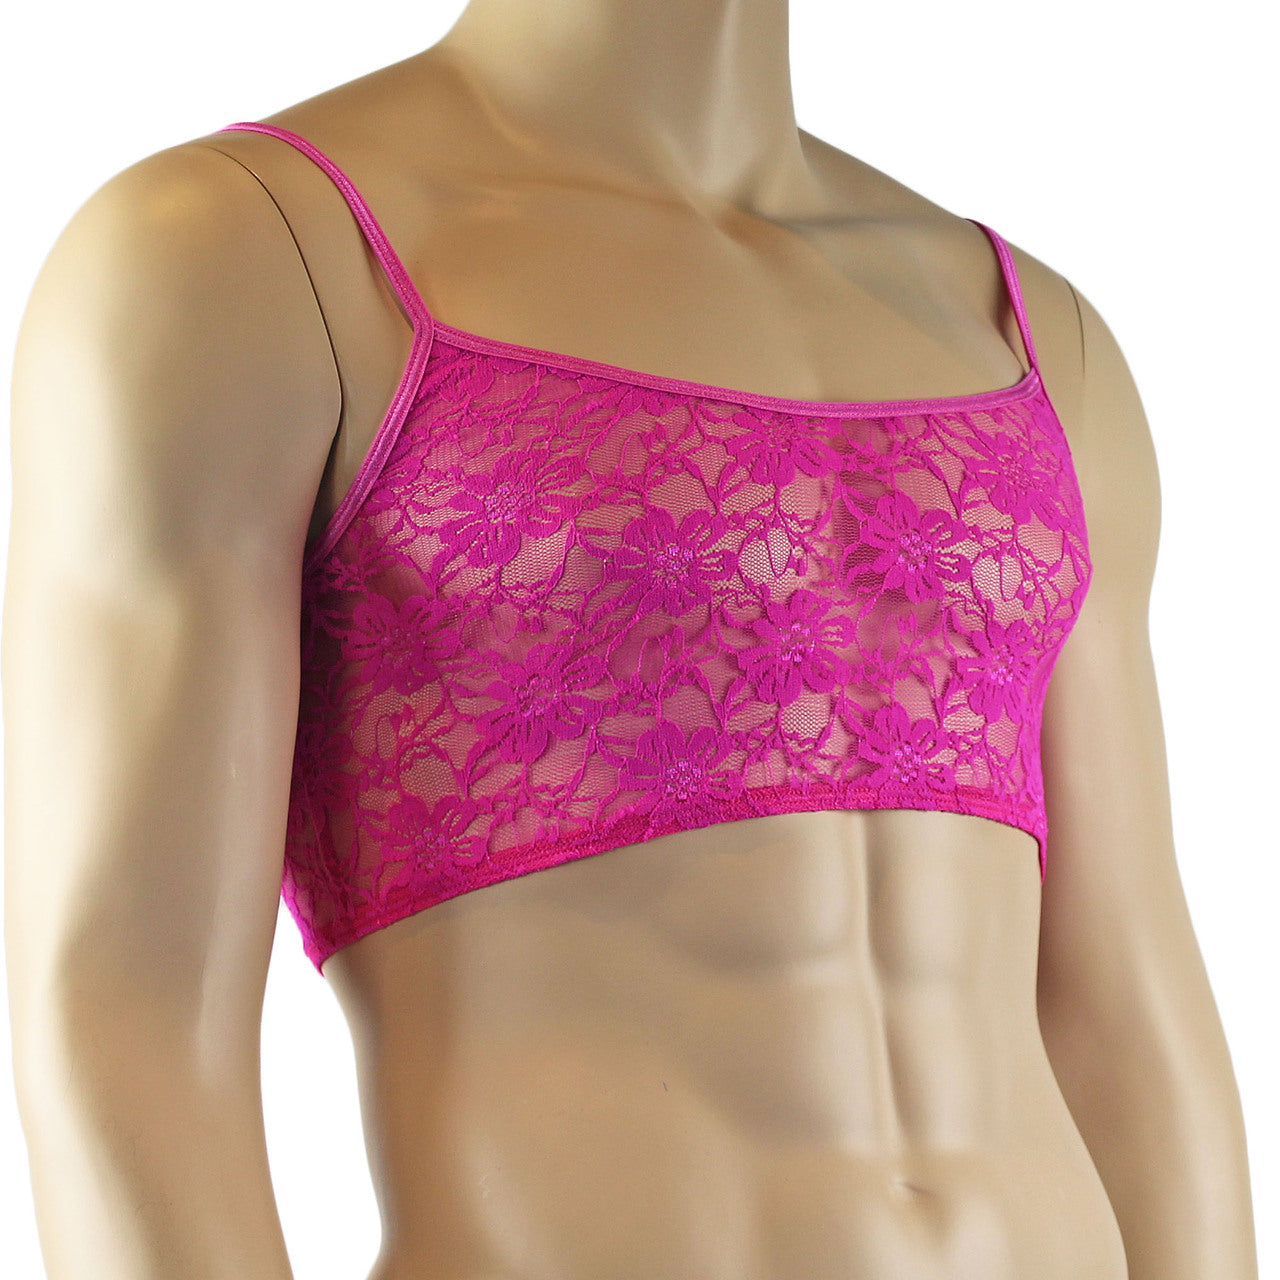 Mens Sexy Lace Crop Bra Top Camisole Black Male Lingerie Neon Pink